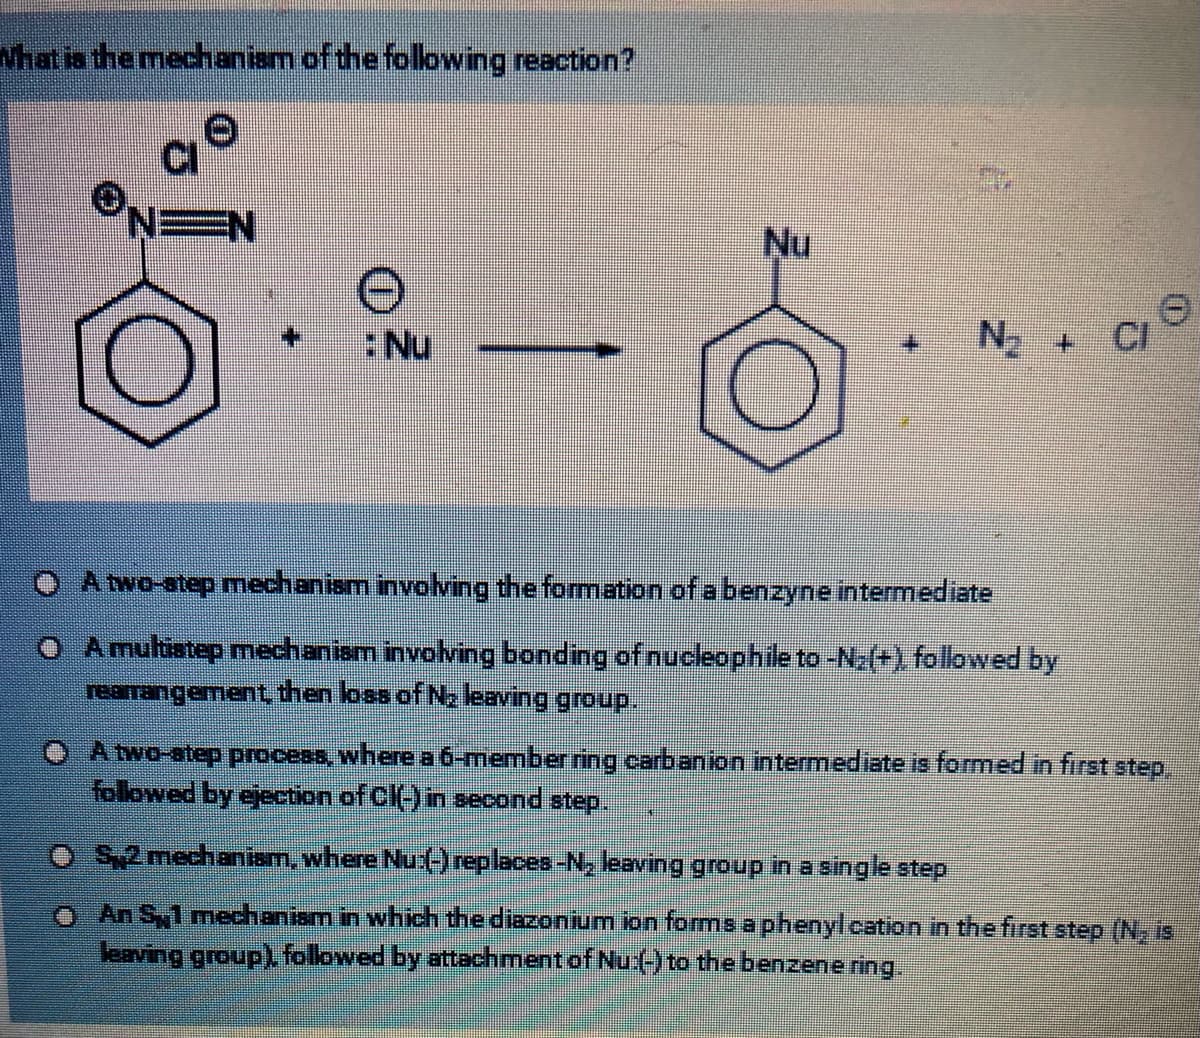 What is the mechanism of the following reaction?
EN
: Nu
Nu
№₂
A two-step mechanism involving the formation of a benzyne intermediate
A multistep mechanism involving bonding of nucleophile to -N: (+), followed by
rearrangement, then loss of N₂ leaving group.
CI
A two-step process, where a 6-member ring carbanion intermediate is formed in first step.
followed by ejection of CI(-) in second step.
O S2 mechanism, where Nu:(-) replaces-N₂ leaving group in a single step
O An S1 mechanism in which the diazonium ion forms a phenyl cation in the first step (N, is
leaving group), followed by attachment of Nu:(-) to the benzene ring.